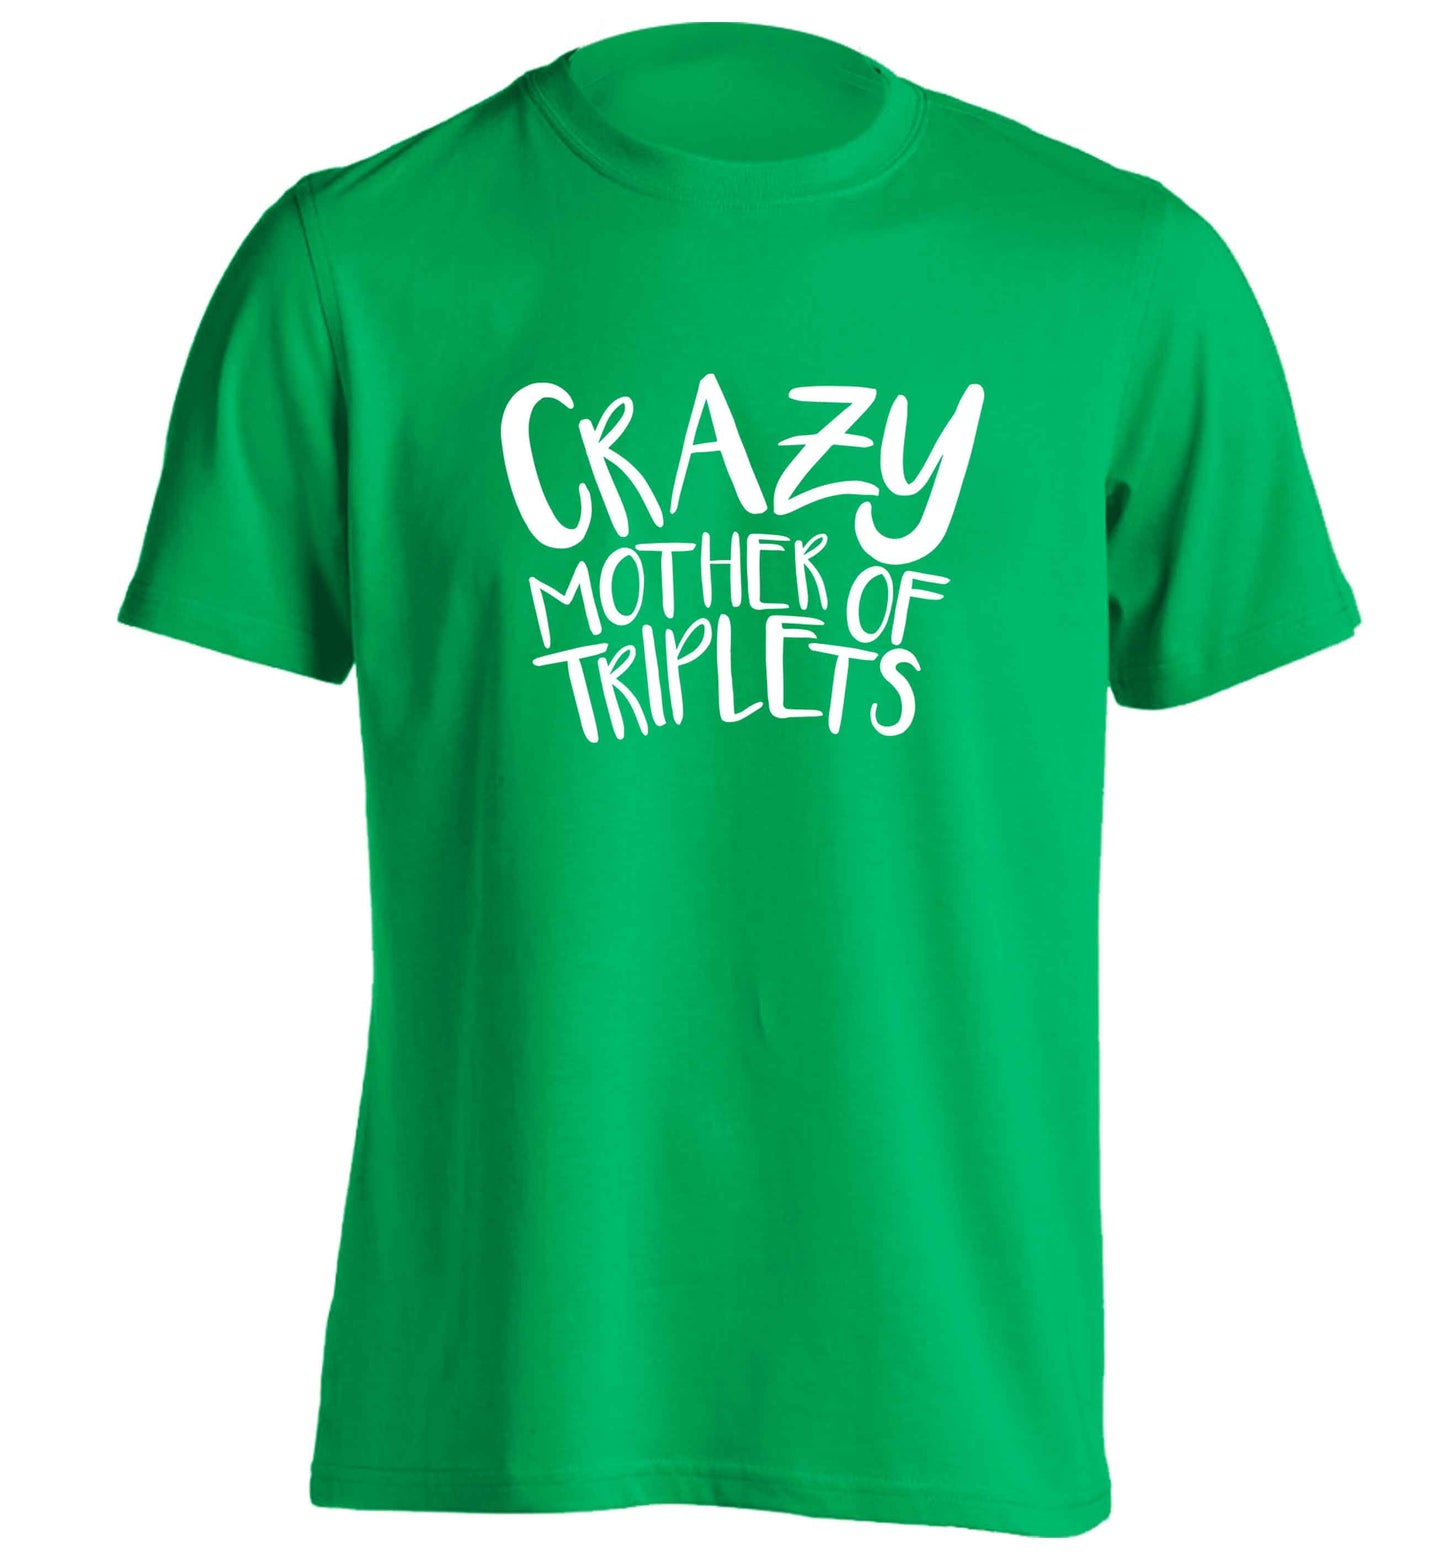 Crazy mother of triplets adults unisex green Tshirt small